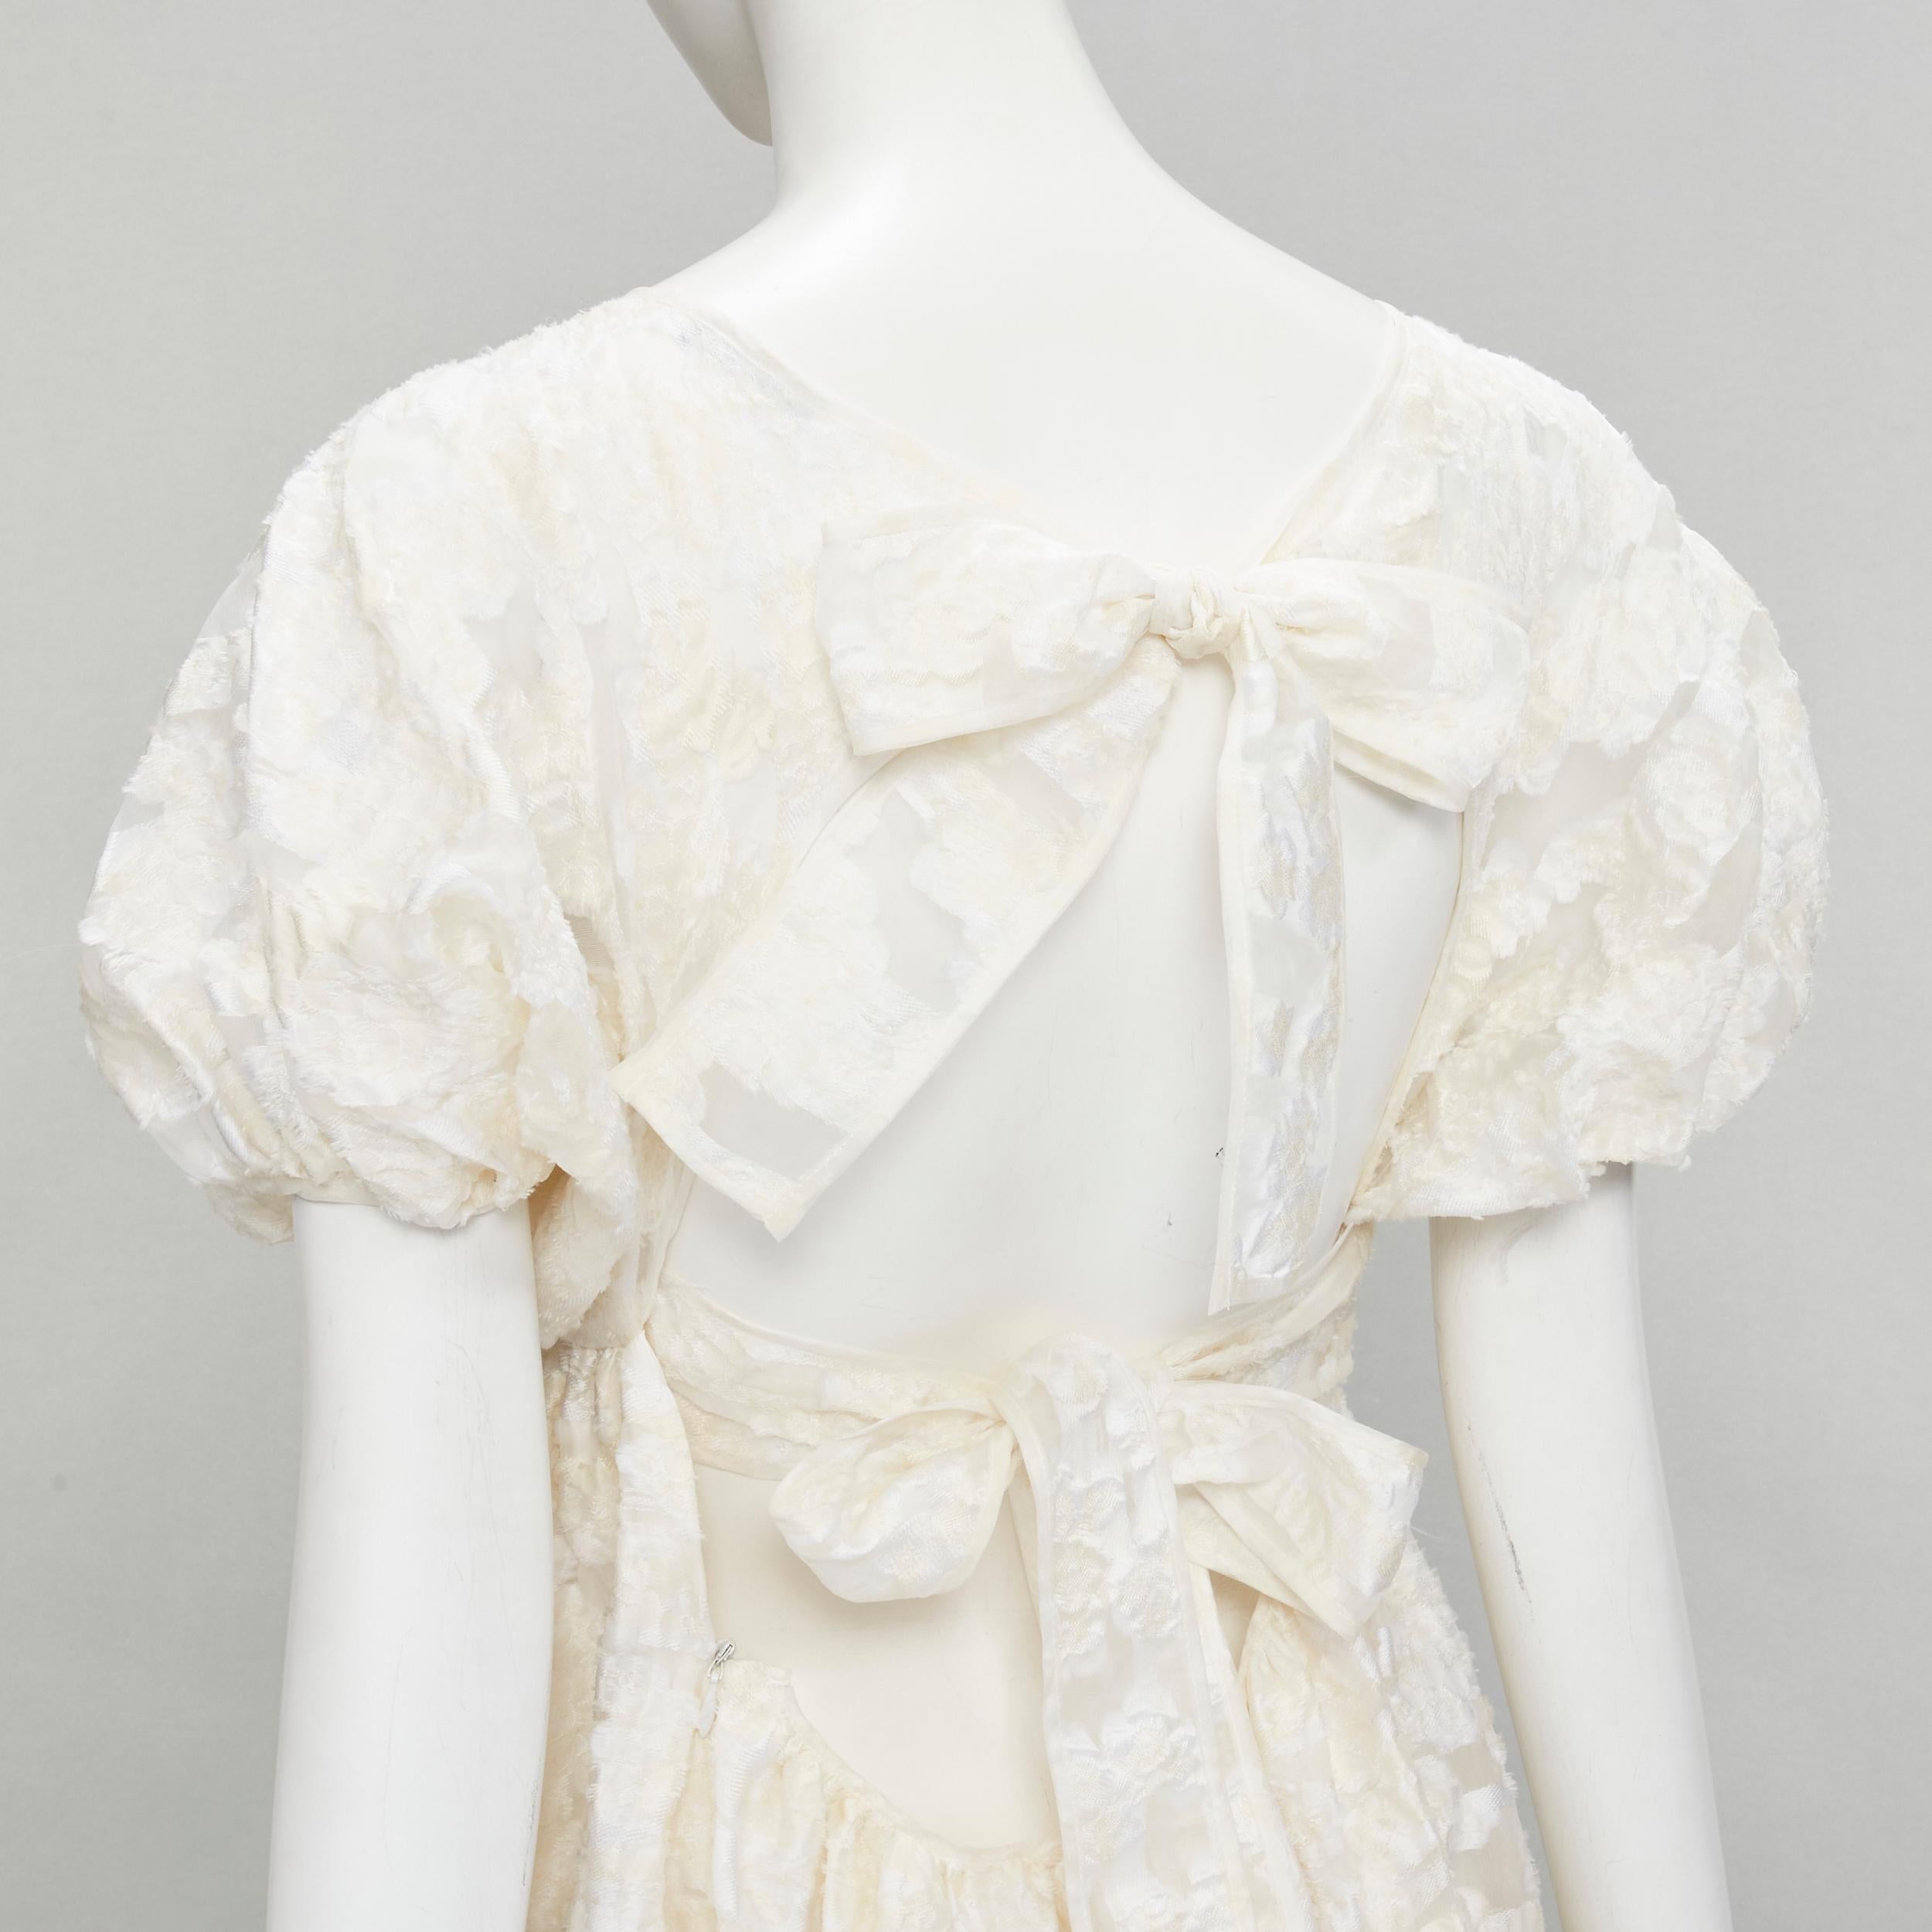 new CECILIE BAHNSEN white floral fil-coupe organza flared bridal dress UK6 XS
Brand: Cecilie Bahnsen
Material: Polyester
Color: Beige
Pattern: Floral
Extra Detail: Cross tie straps. Side zip closure.

CONDITION:
Condition: New with tags. 
Comes